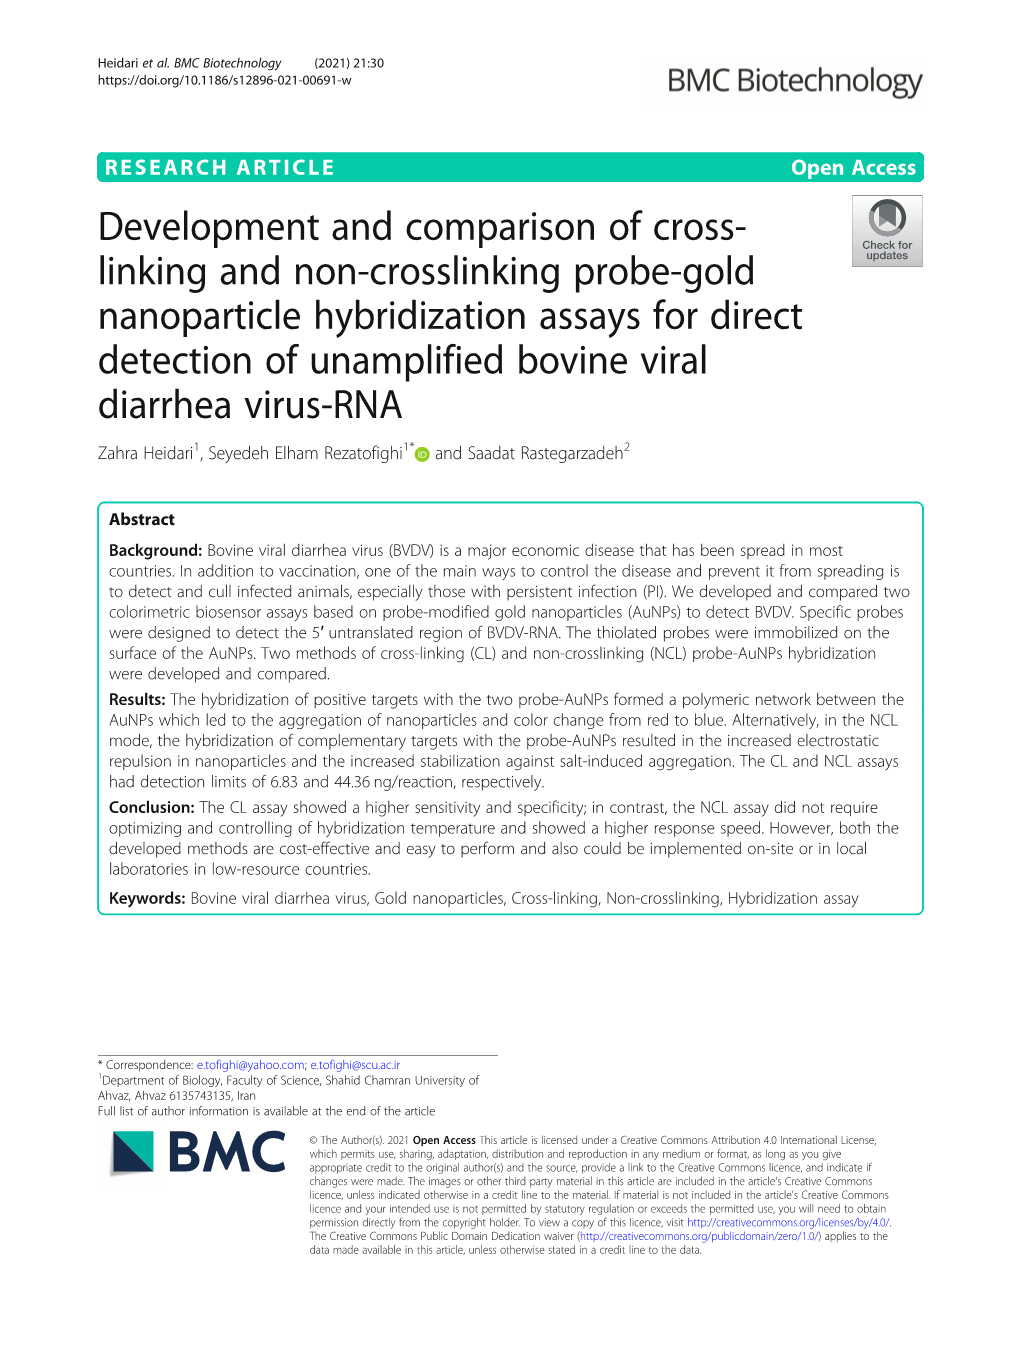 Linking and Non-Crosslinking Probe-Gold Nanoparticle Hybridization Assays for Direct Detection of Unamplified Bovine Viral Diarrhea Virus-RNA